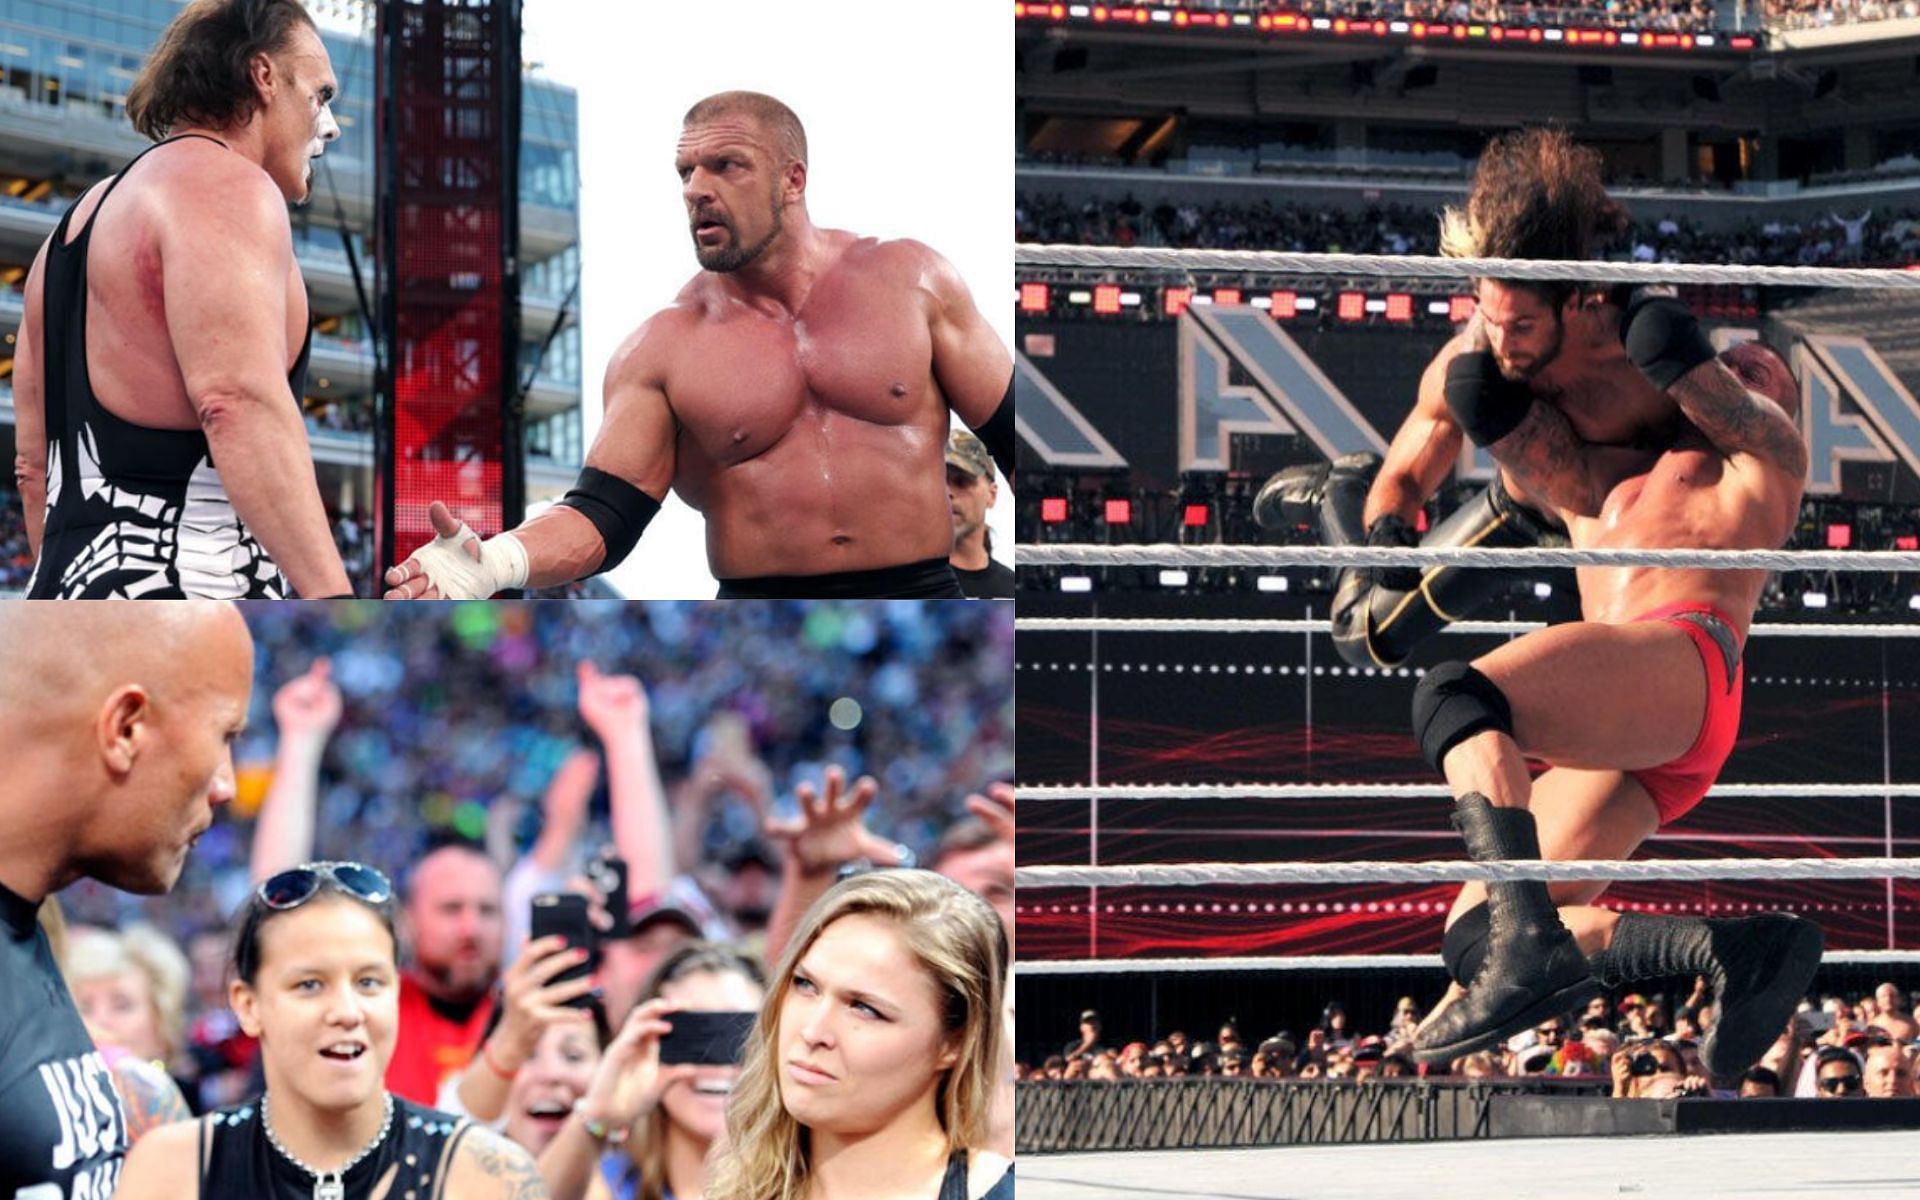 WrestleMania 31 was a marquee event that raised the standards for future shows (Image source: WWE)